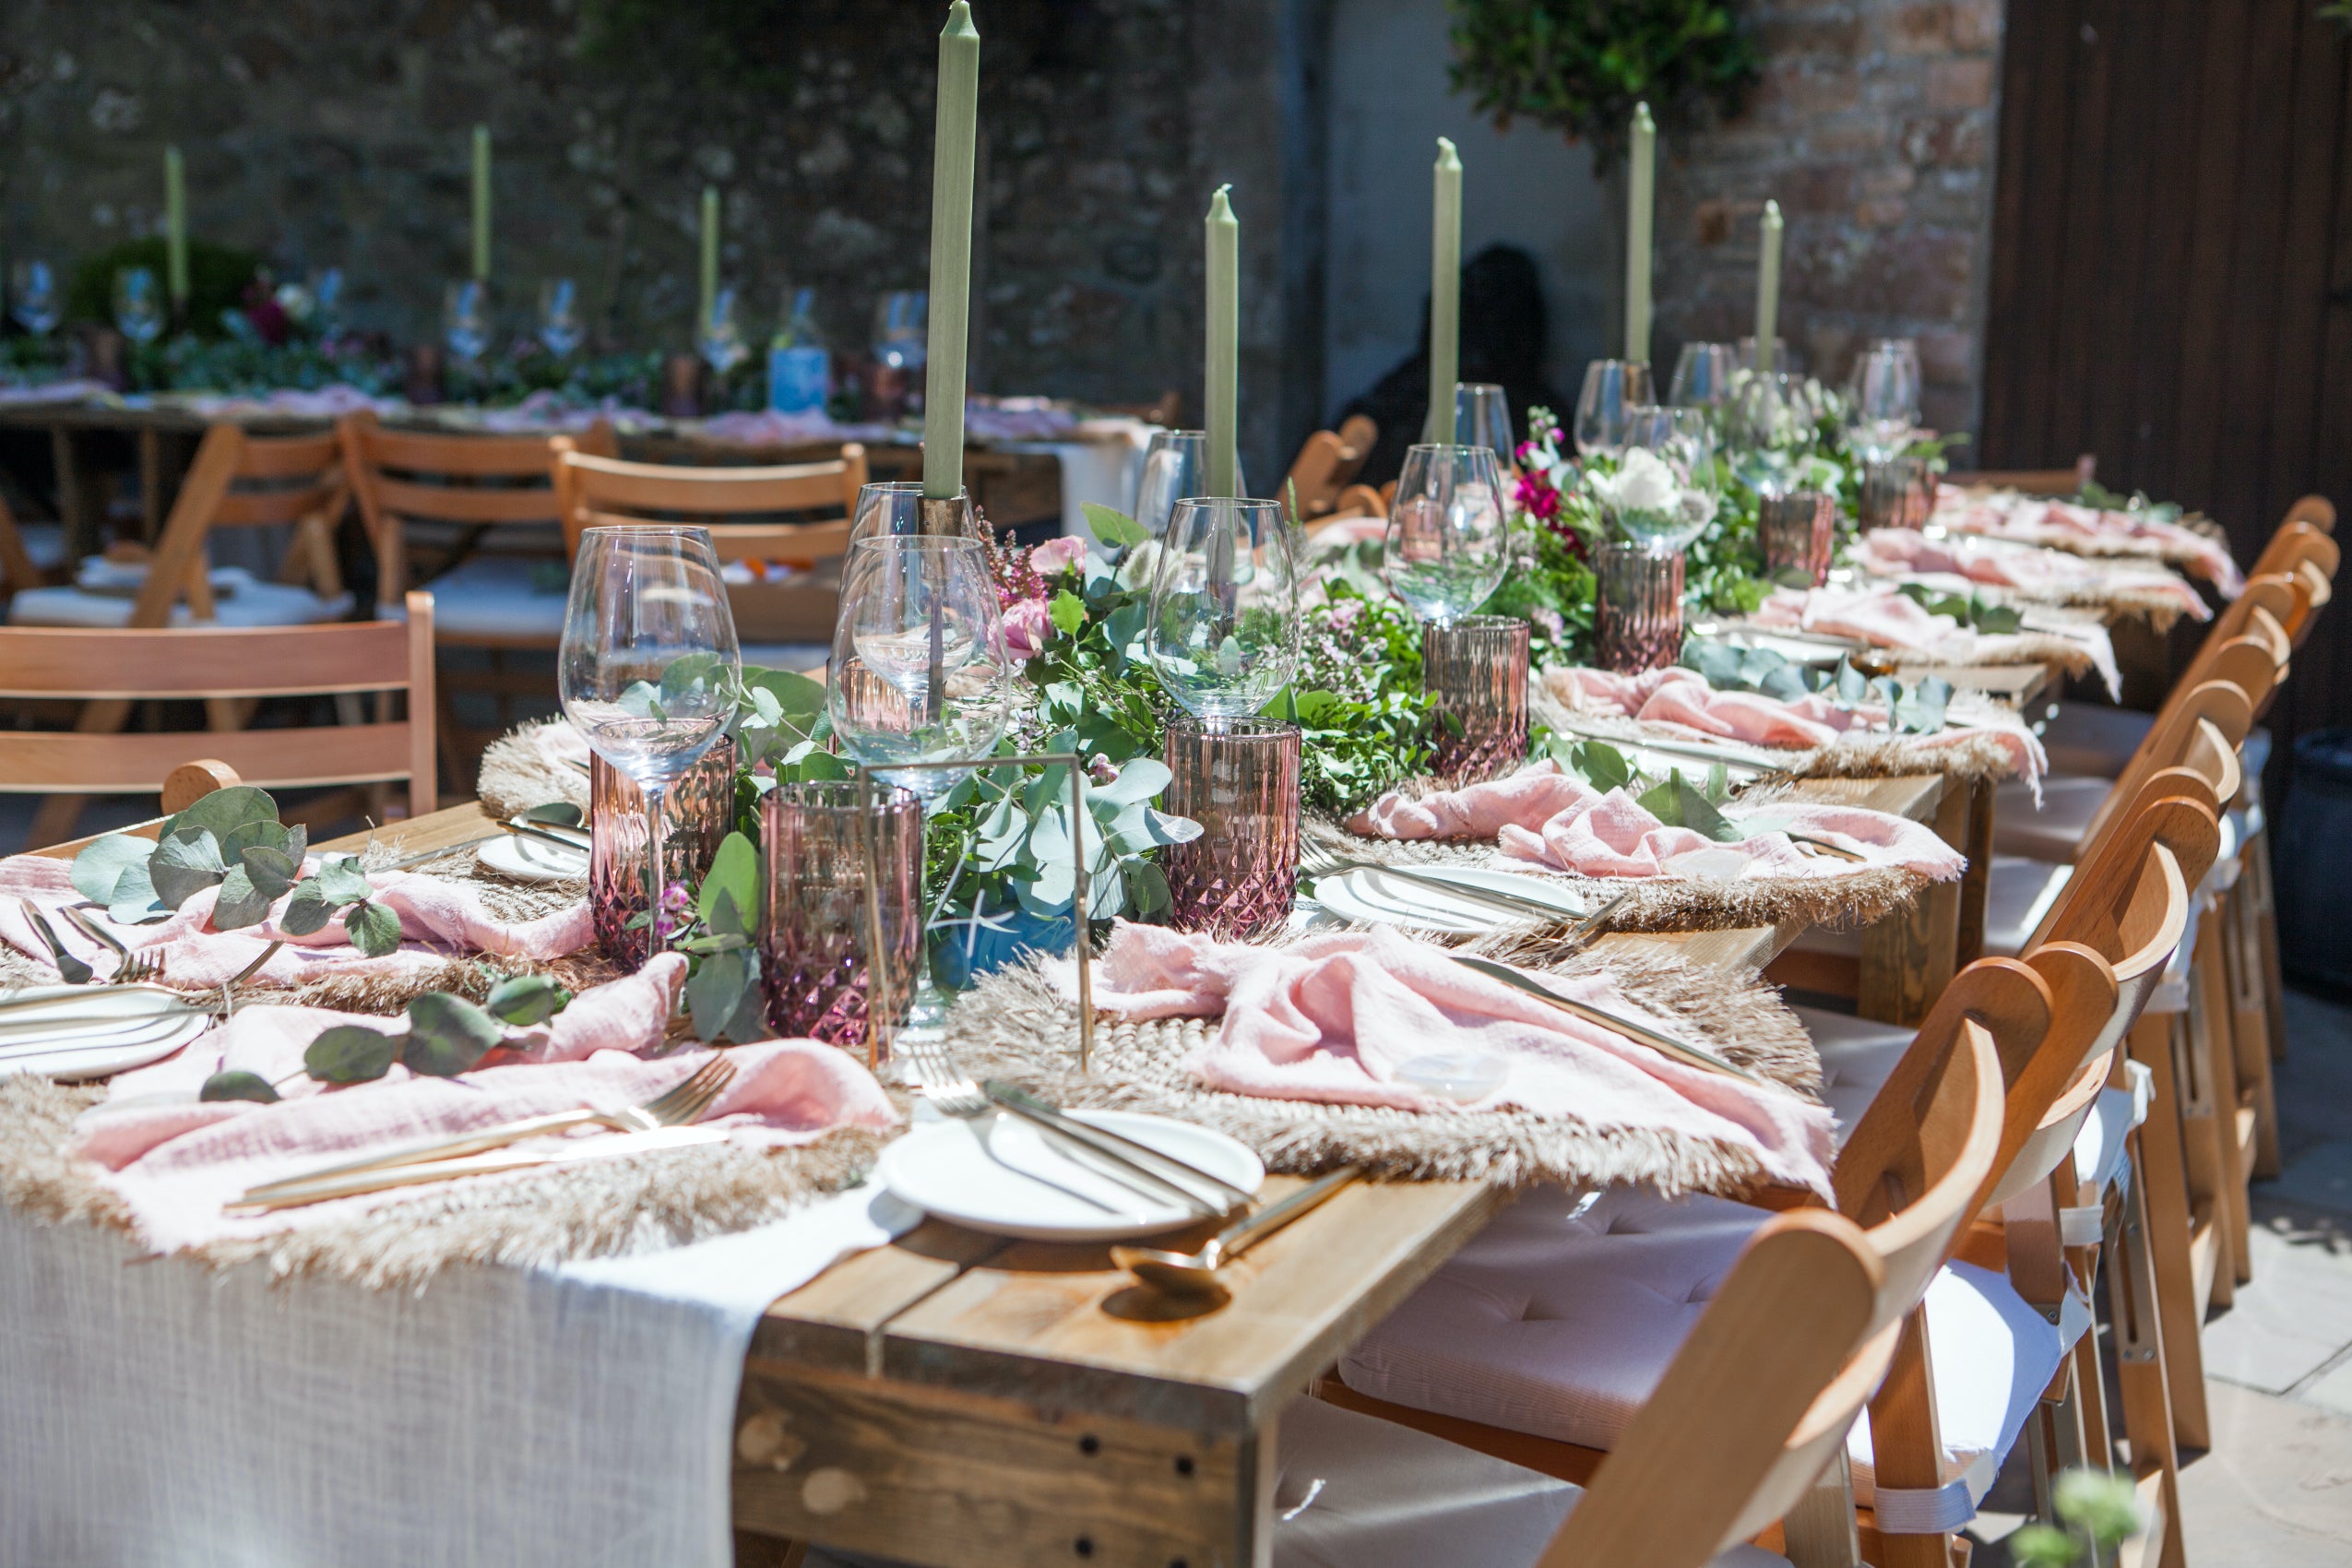 What a Host Home: Wedding Table Decoration Outdoor